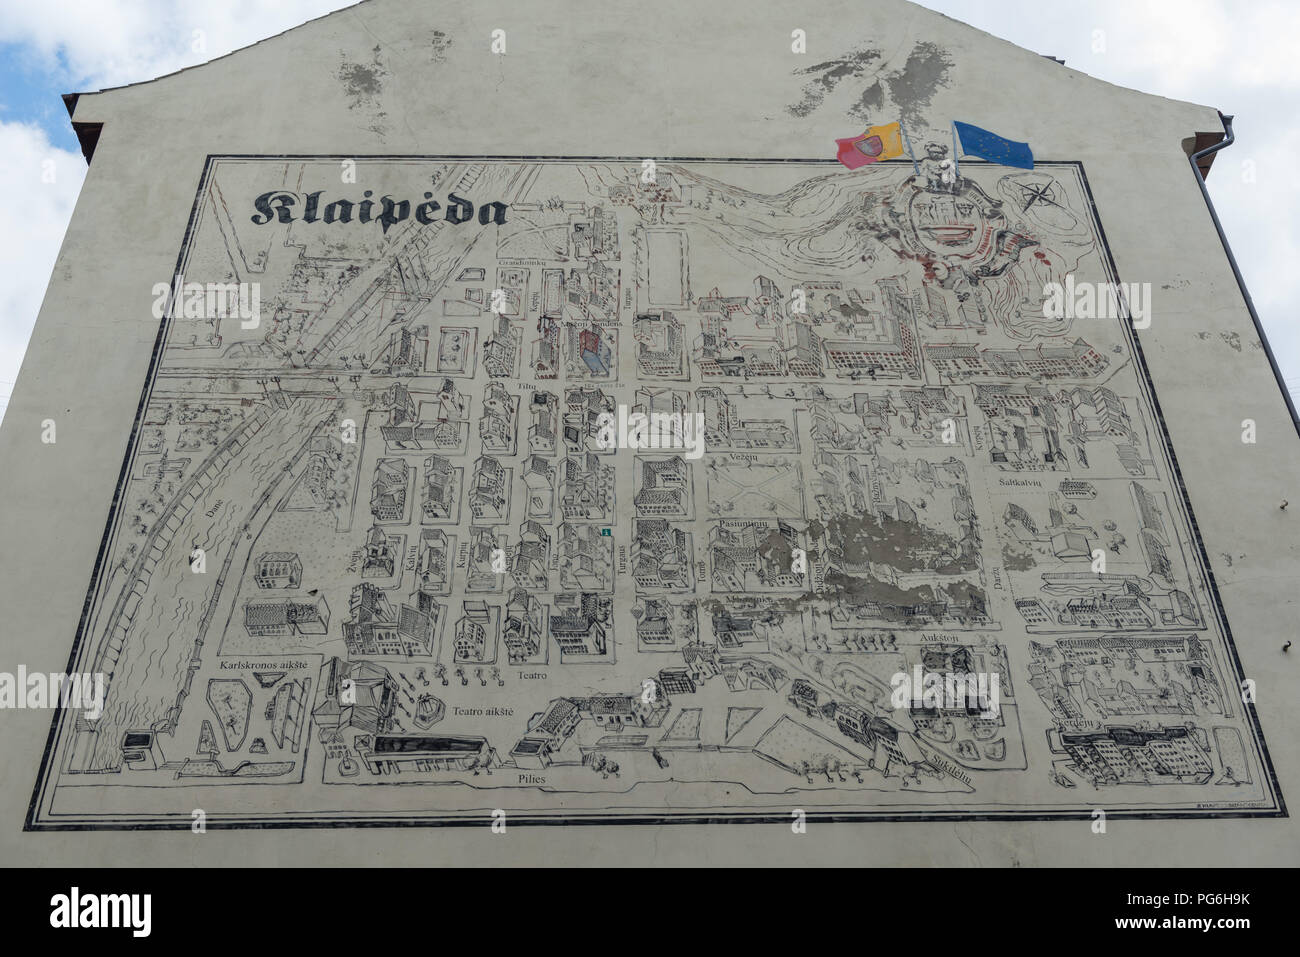 Street map of the city on a house wall, Klaipeda, Courland Lagoon, Lithuania, Eastern Europe Stock Photo